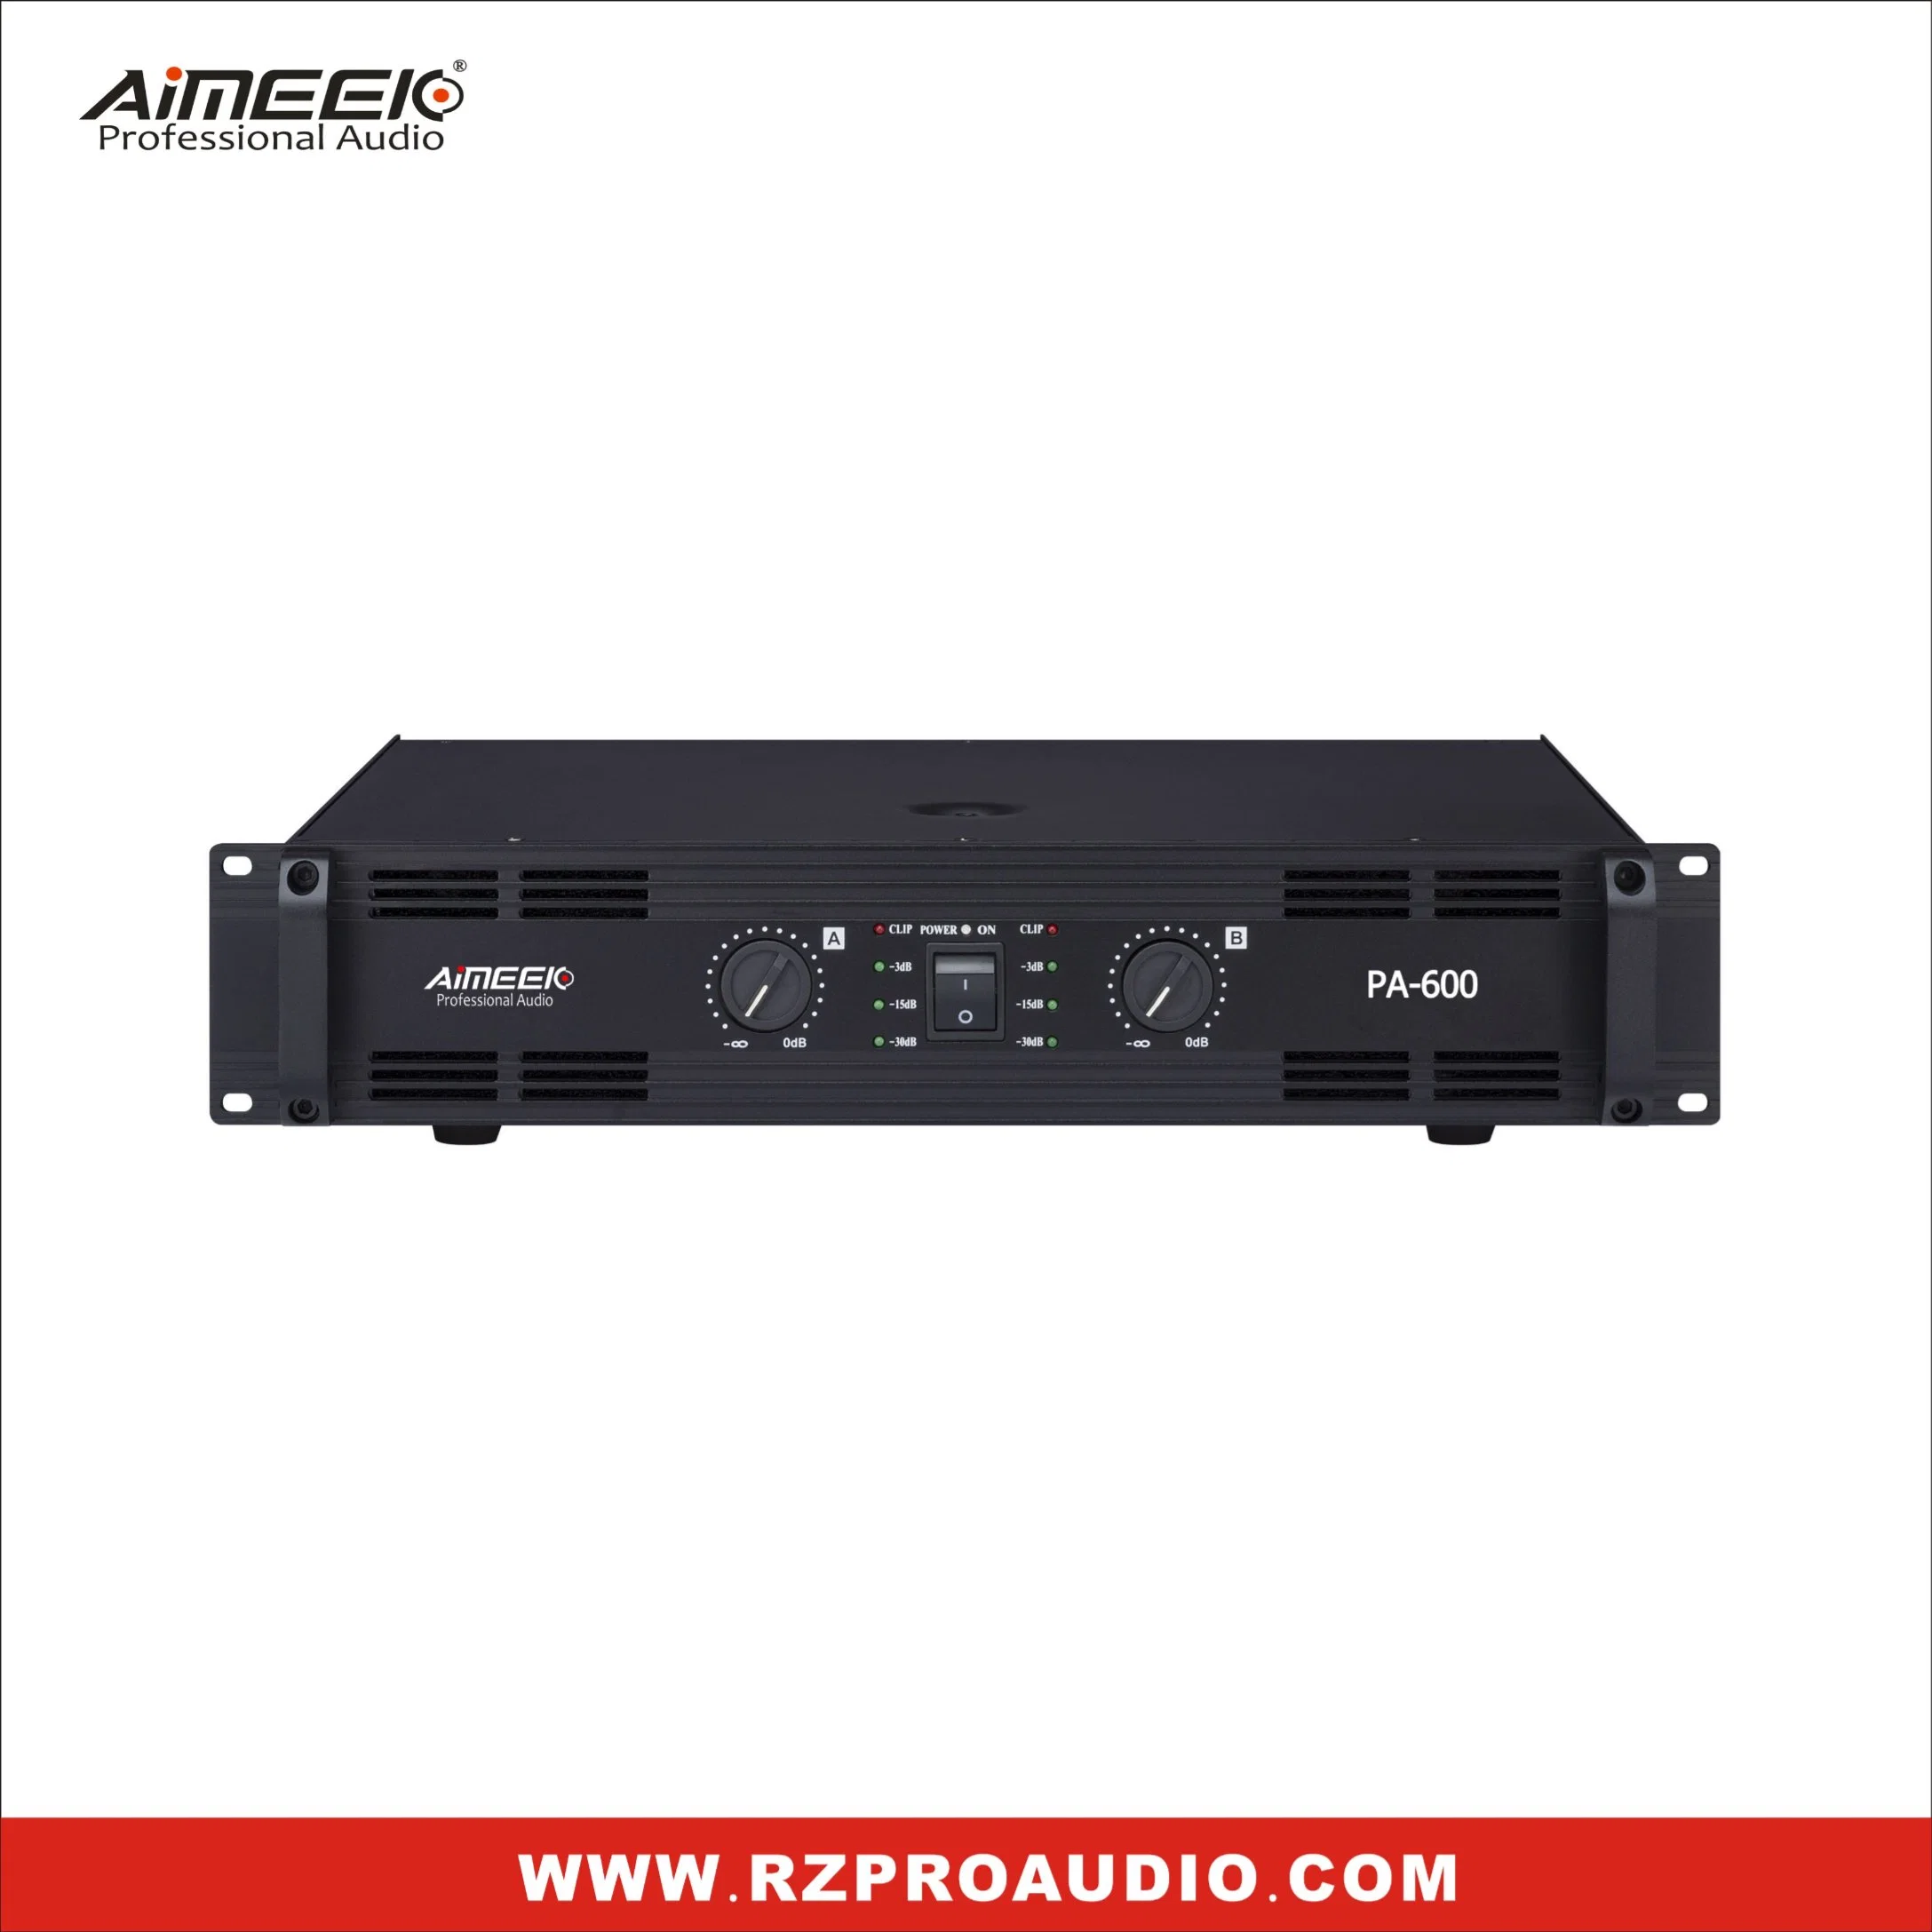 Strong Circuit 2u Tube Amplifier PRO Audio for Club / Home Party/Professional Sound Application